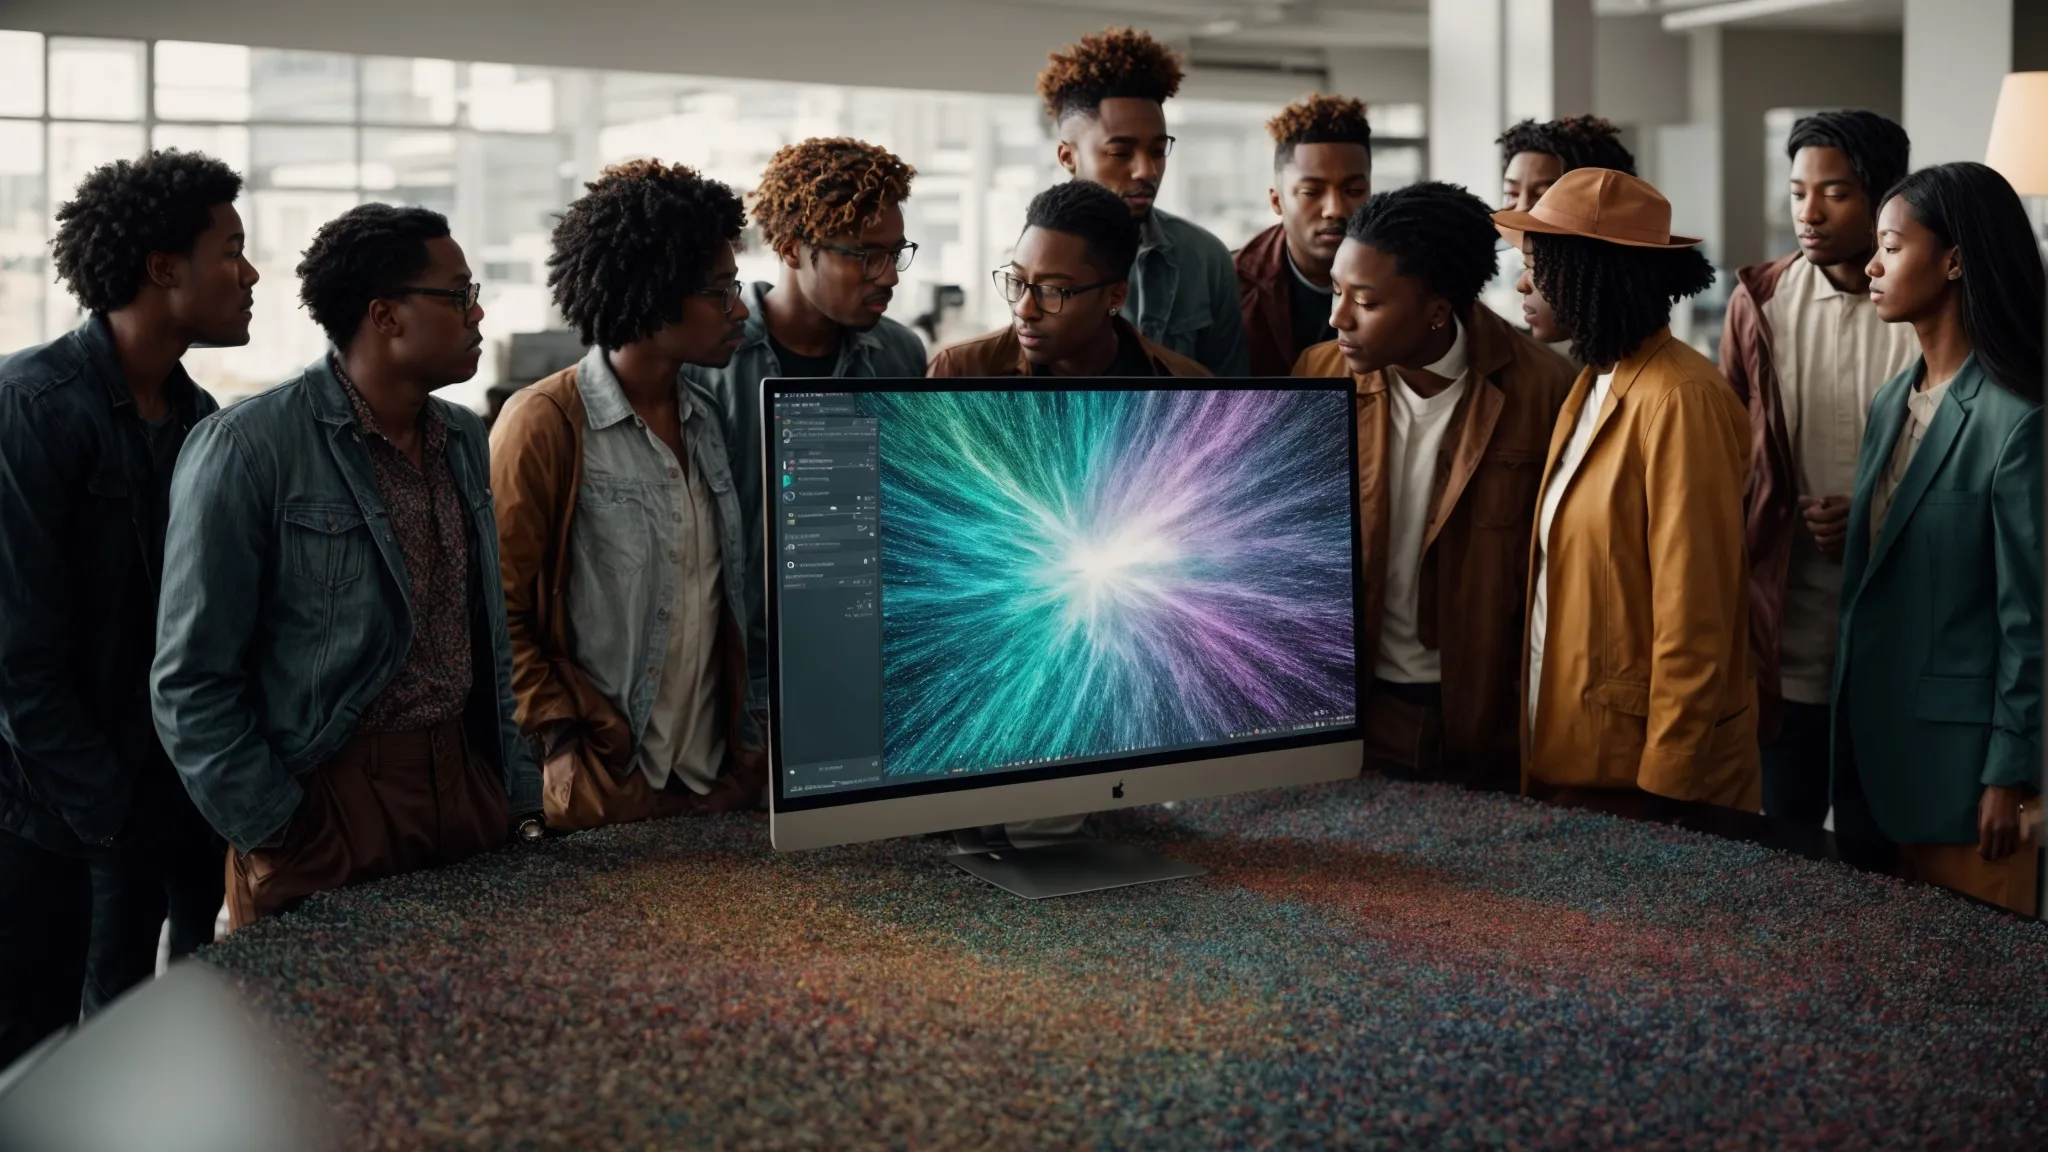 a group of diverse people gather around a large computer screen, displaying a colorful, abstract visualization of a search algorithm.